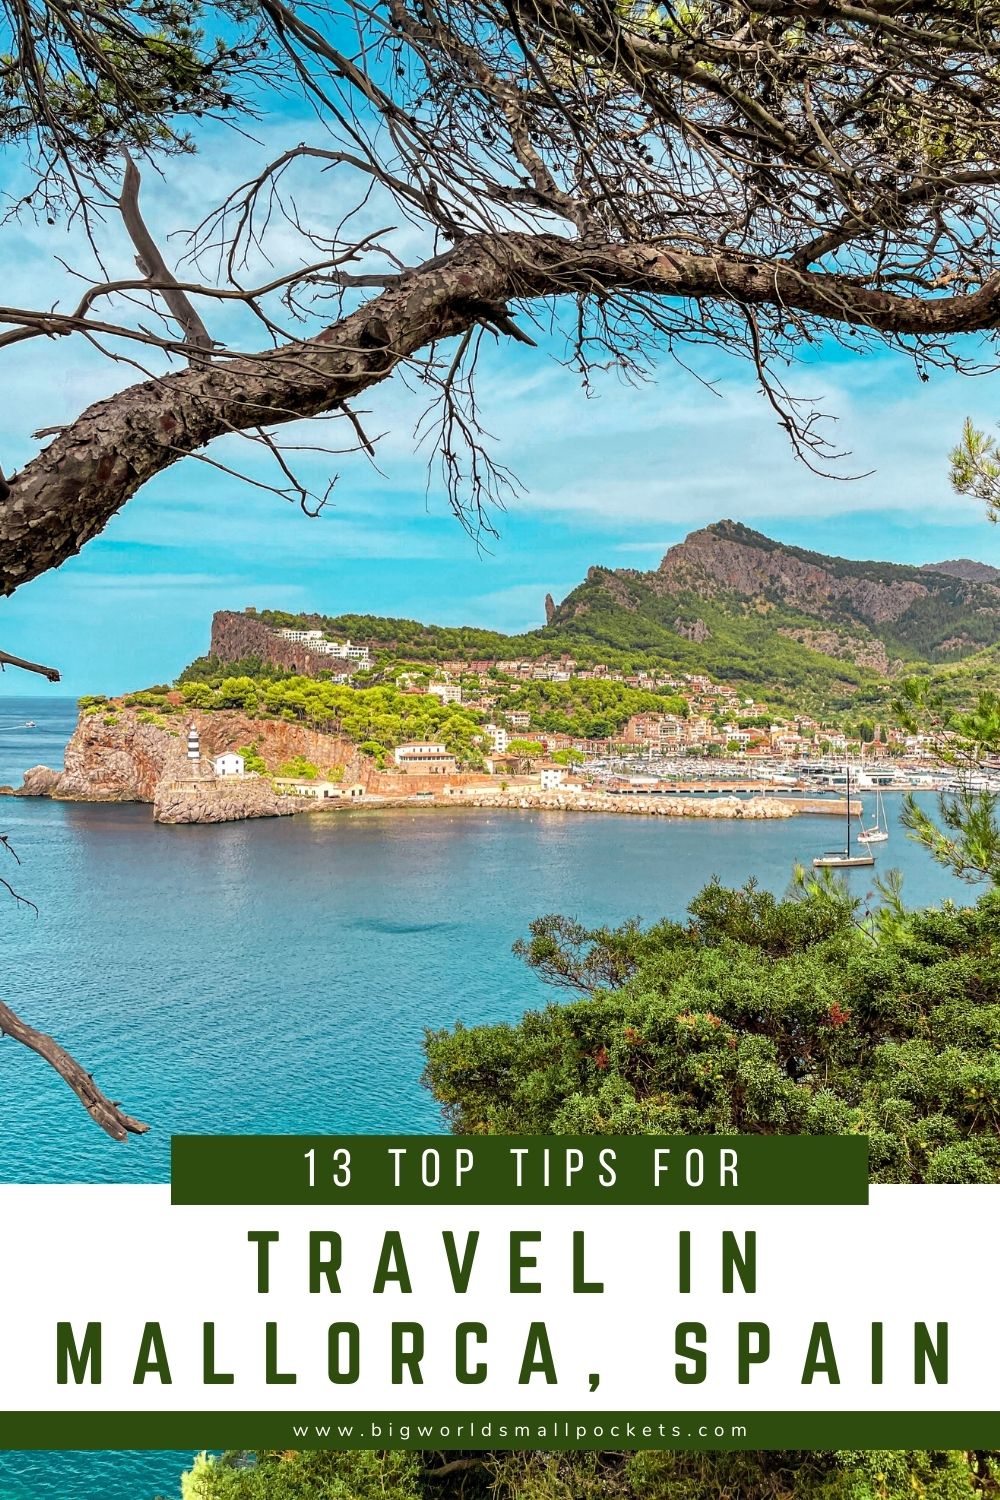 13 Top Travel Tips for Mallorca, Spain